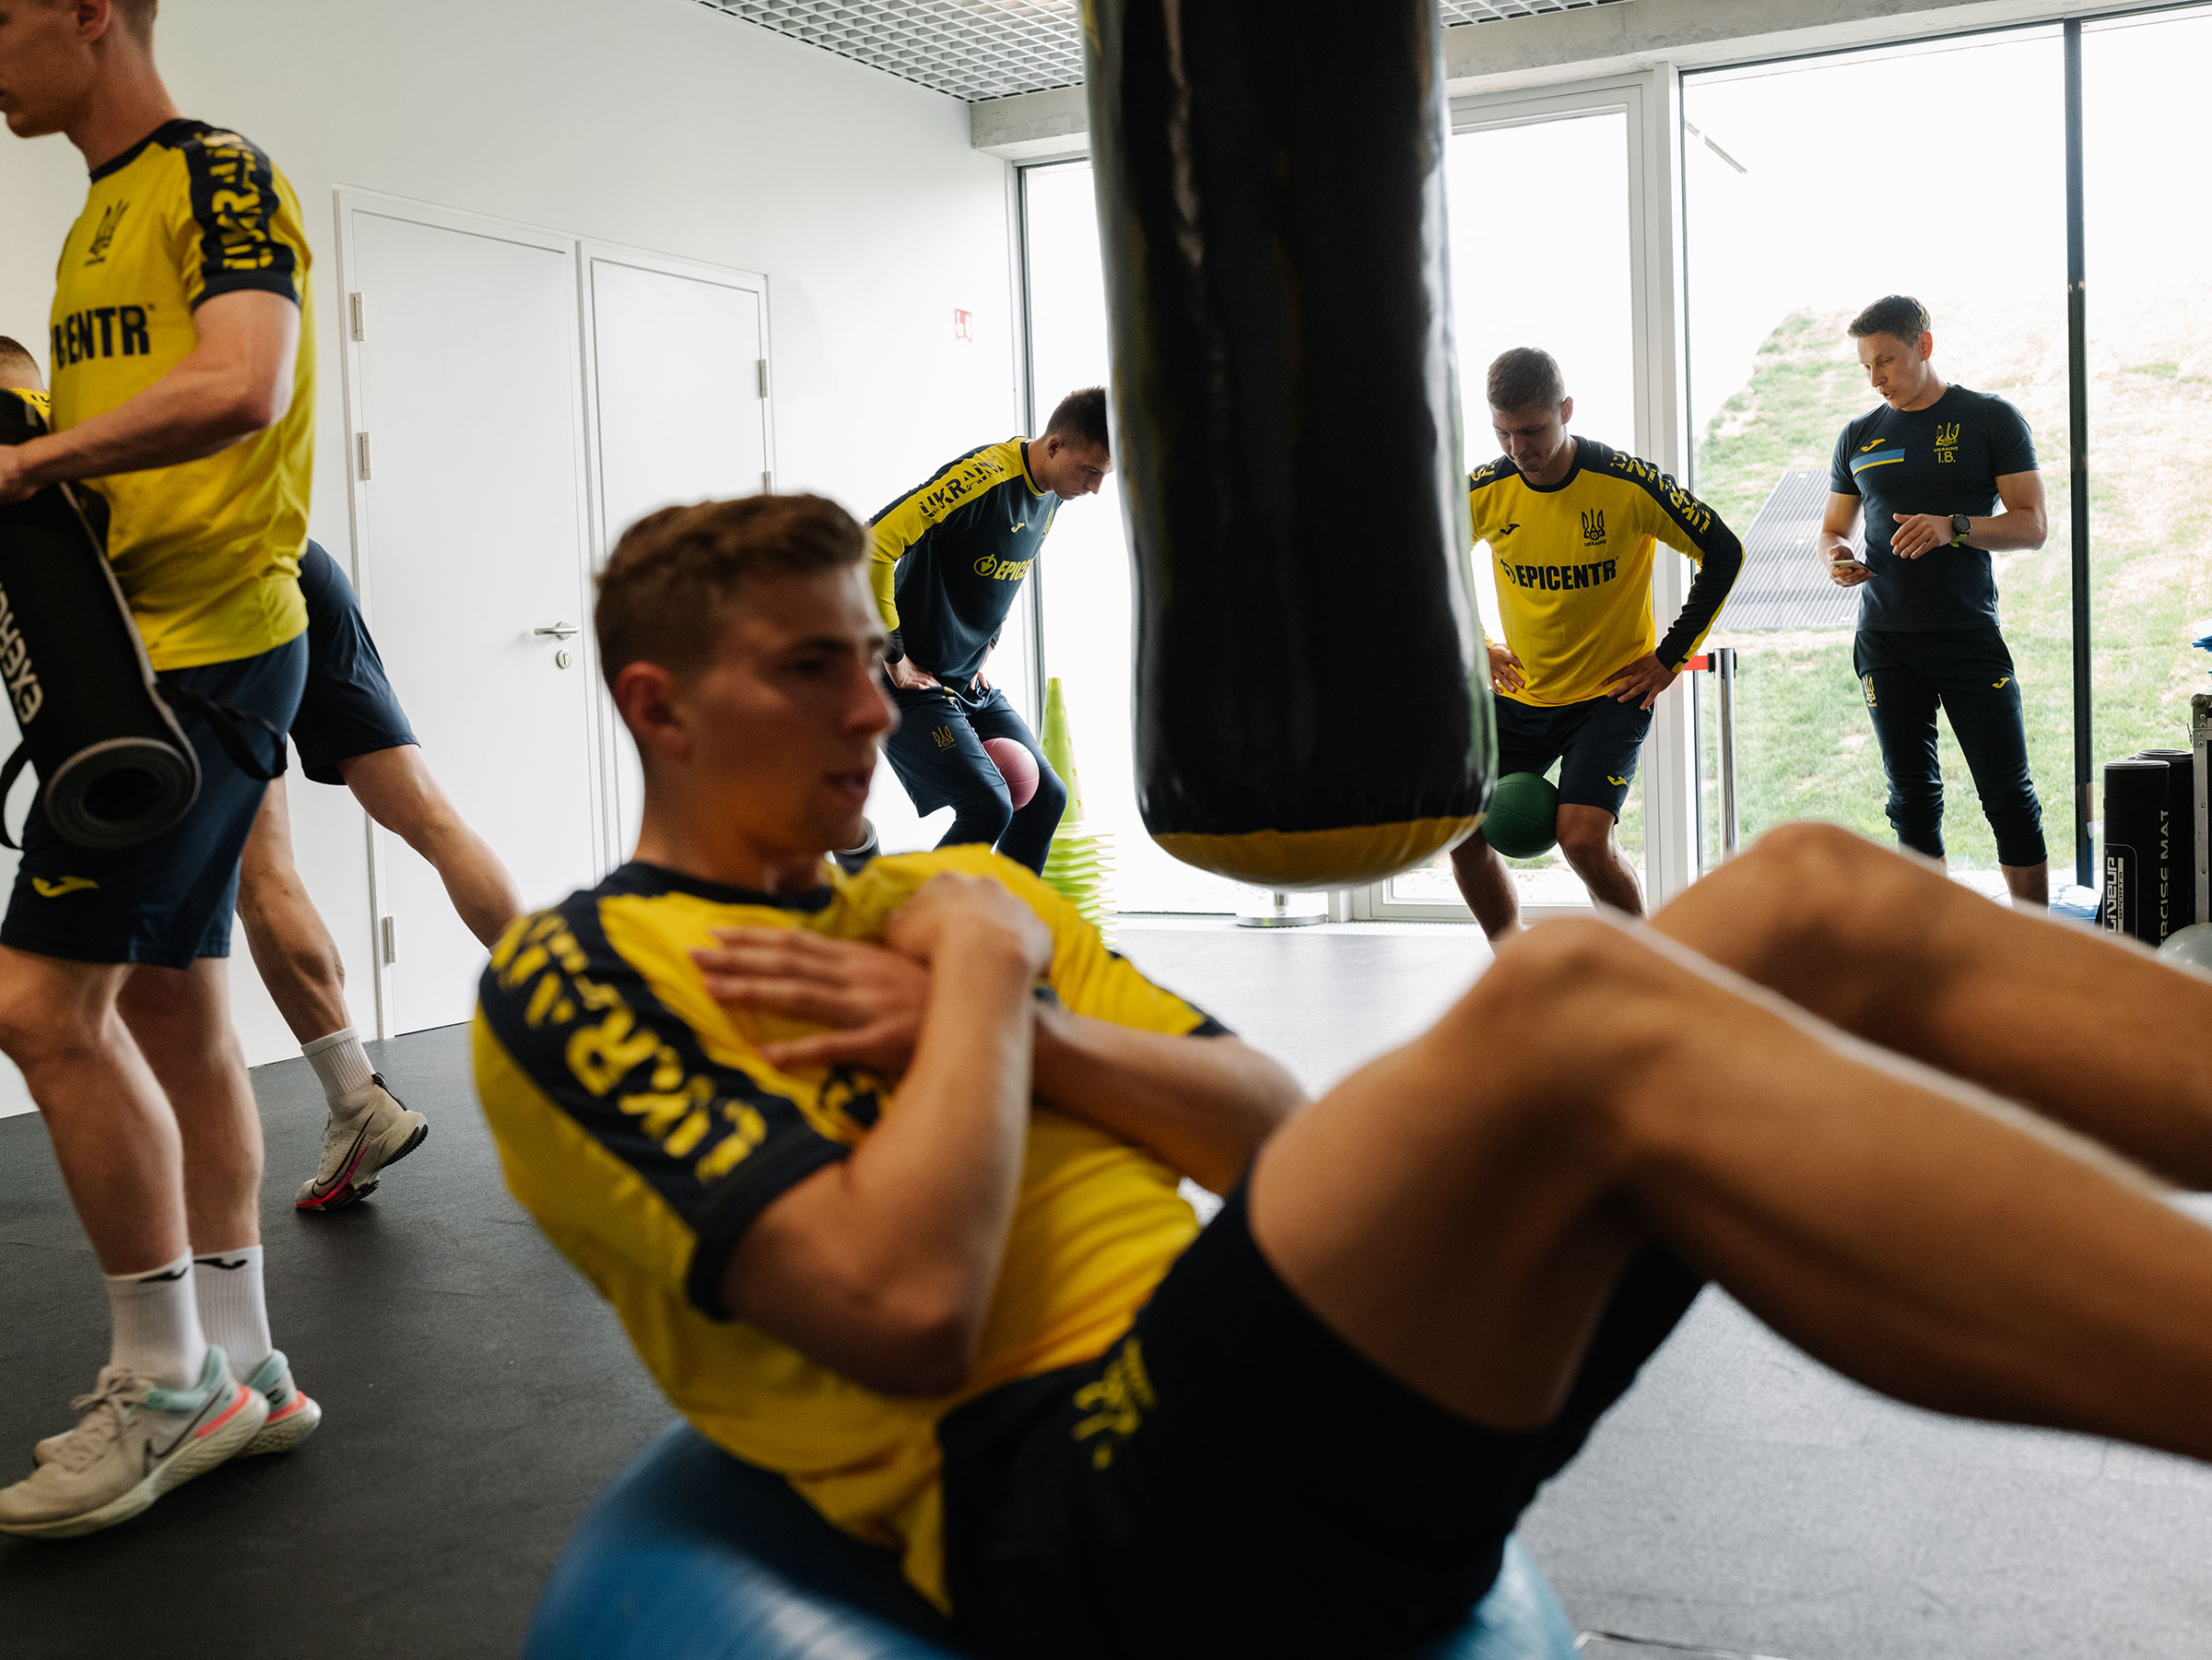 Members of the team train in the gym at the National Football Center in Brdo, Slovenia. (Ciril Jazbec for TIME)